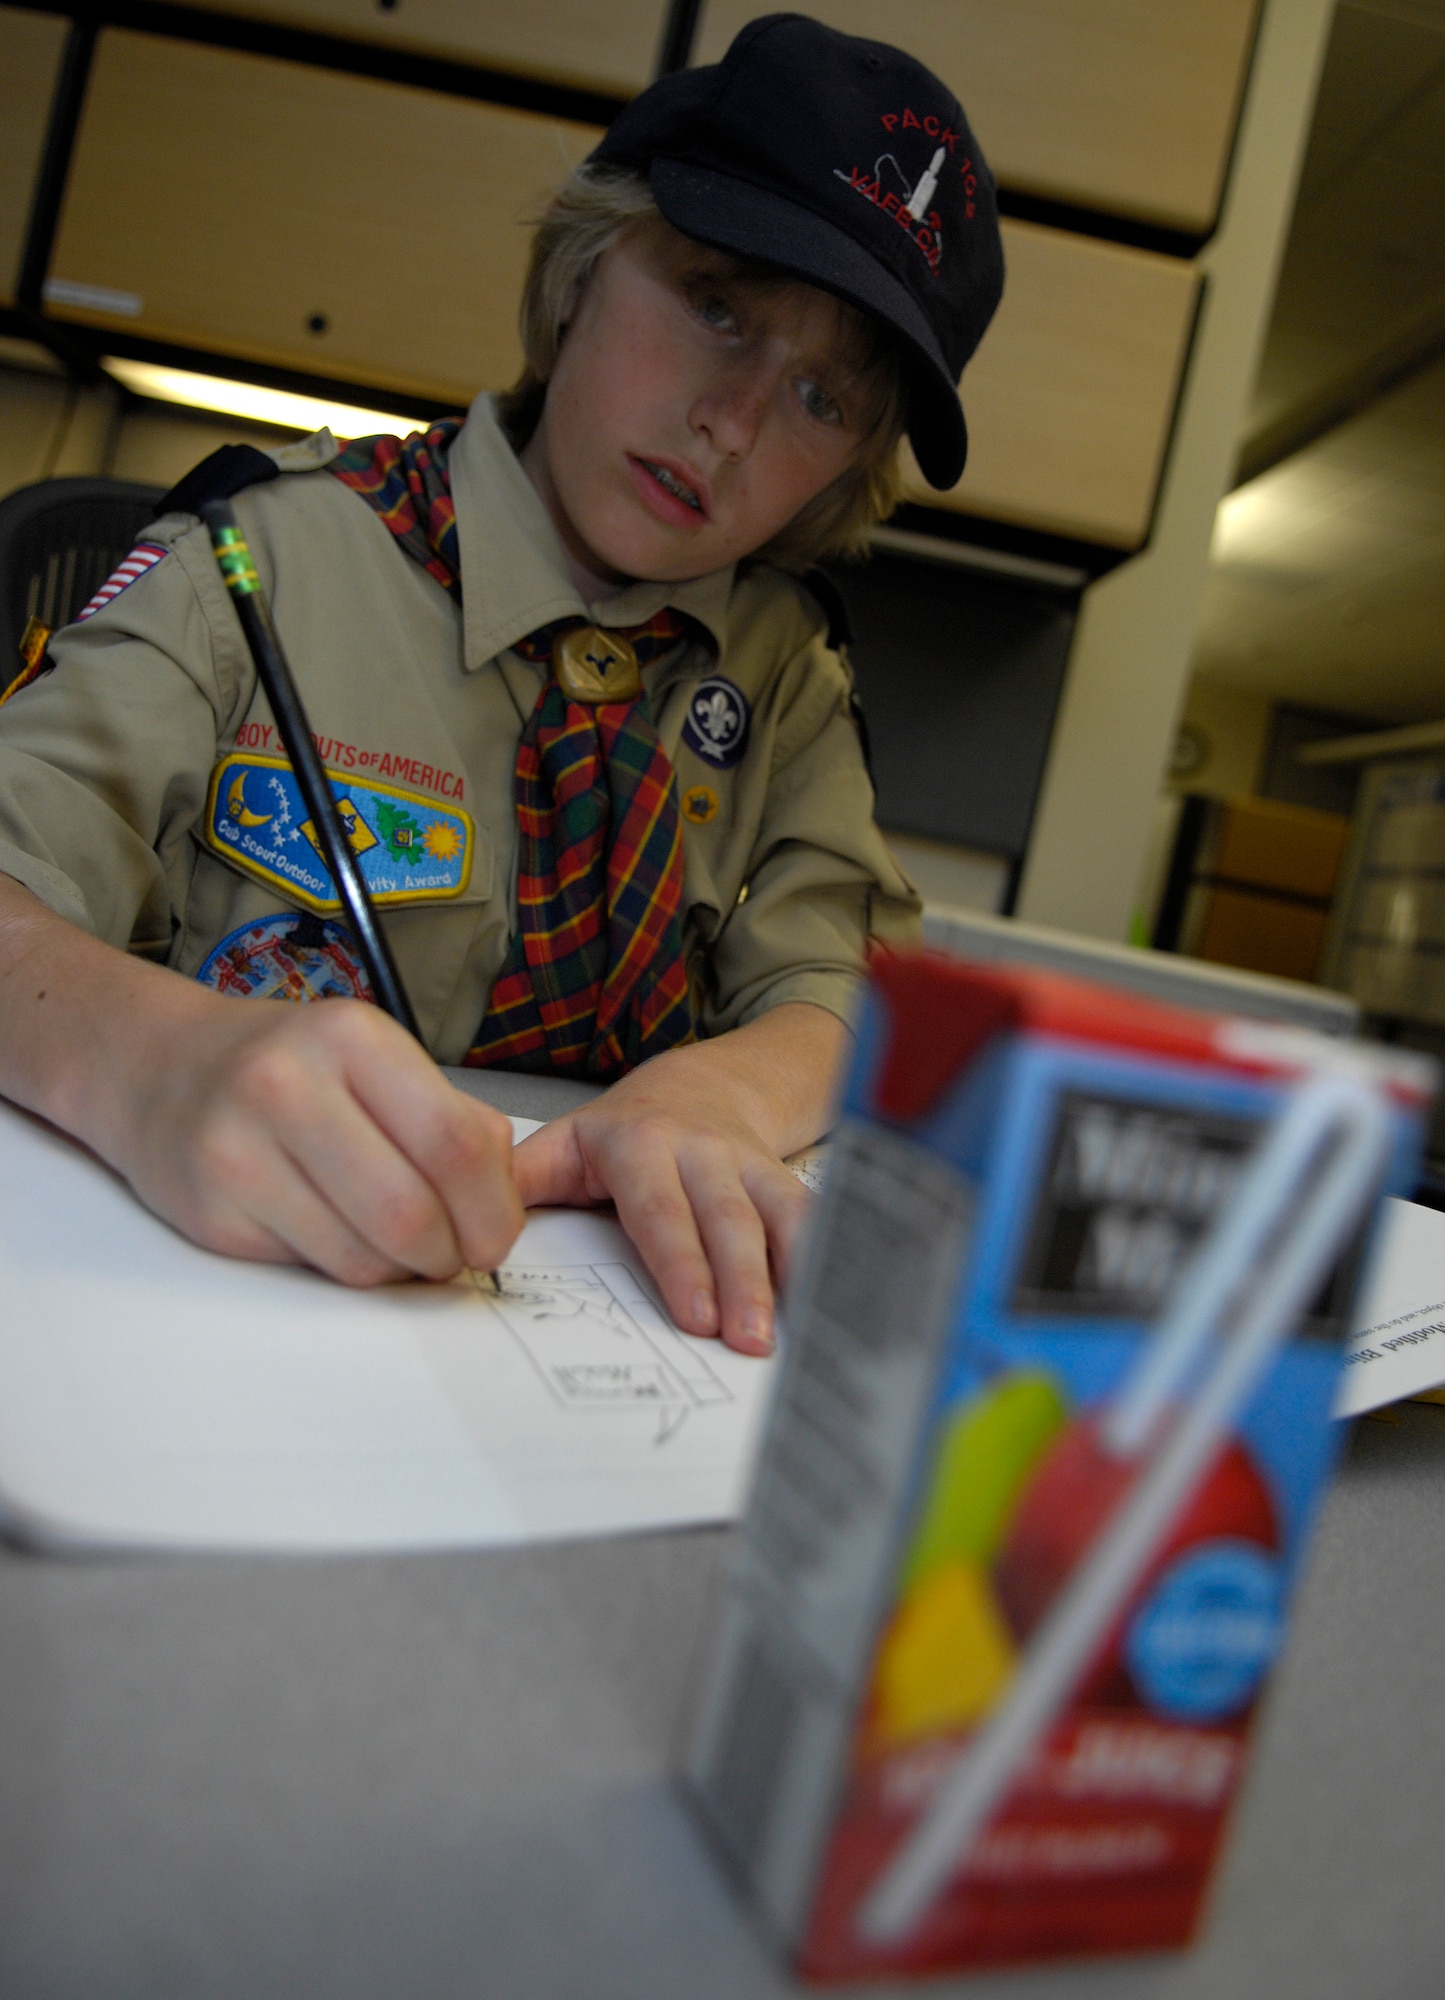 VANDENBERG AIR FORCE BASE, Calif. --  Ethan Ramey, a Vandenberg Cub Scout, sketches his apple juice box April 9 in an attempt to get one step closer to his Art Merit Badge. One of the requirements to obtain the badge is speaking with a professional artist, who in this case was Jan Kays, a 30th Space Wing Public Affairs graphic illustrator. (U.S. Air Force photo/Airman 1st Class Andrew Lee)